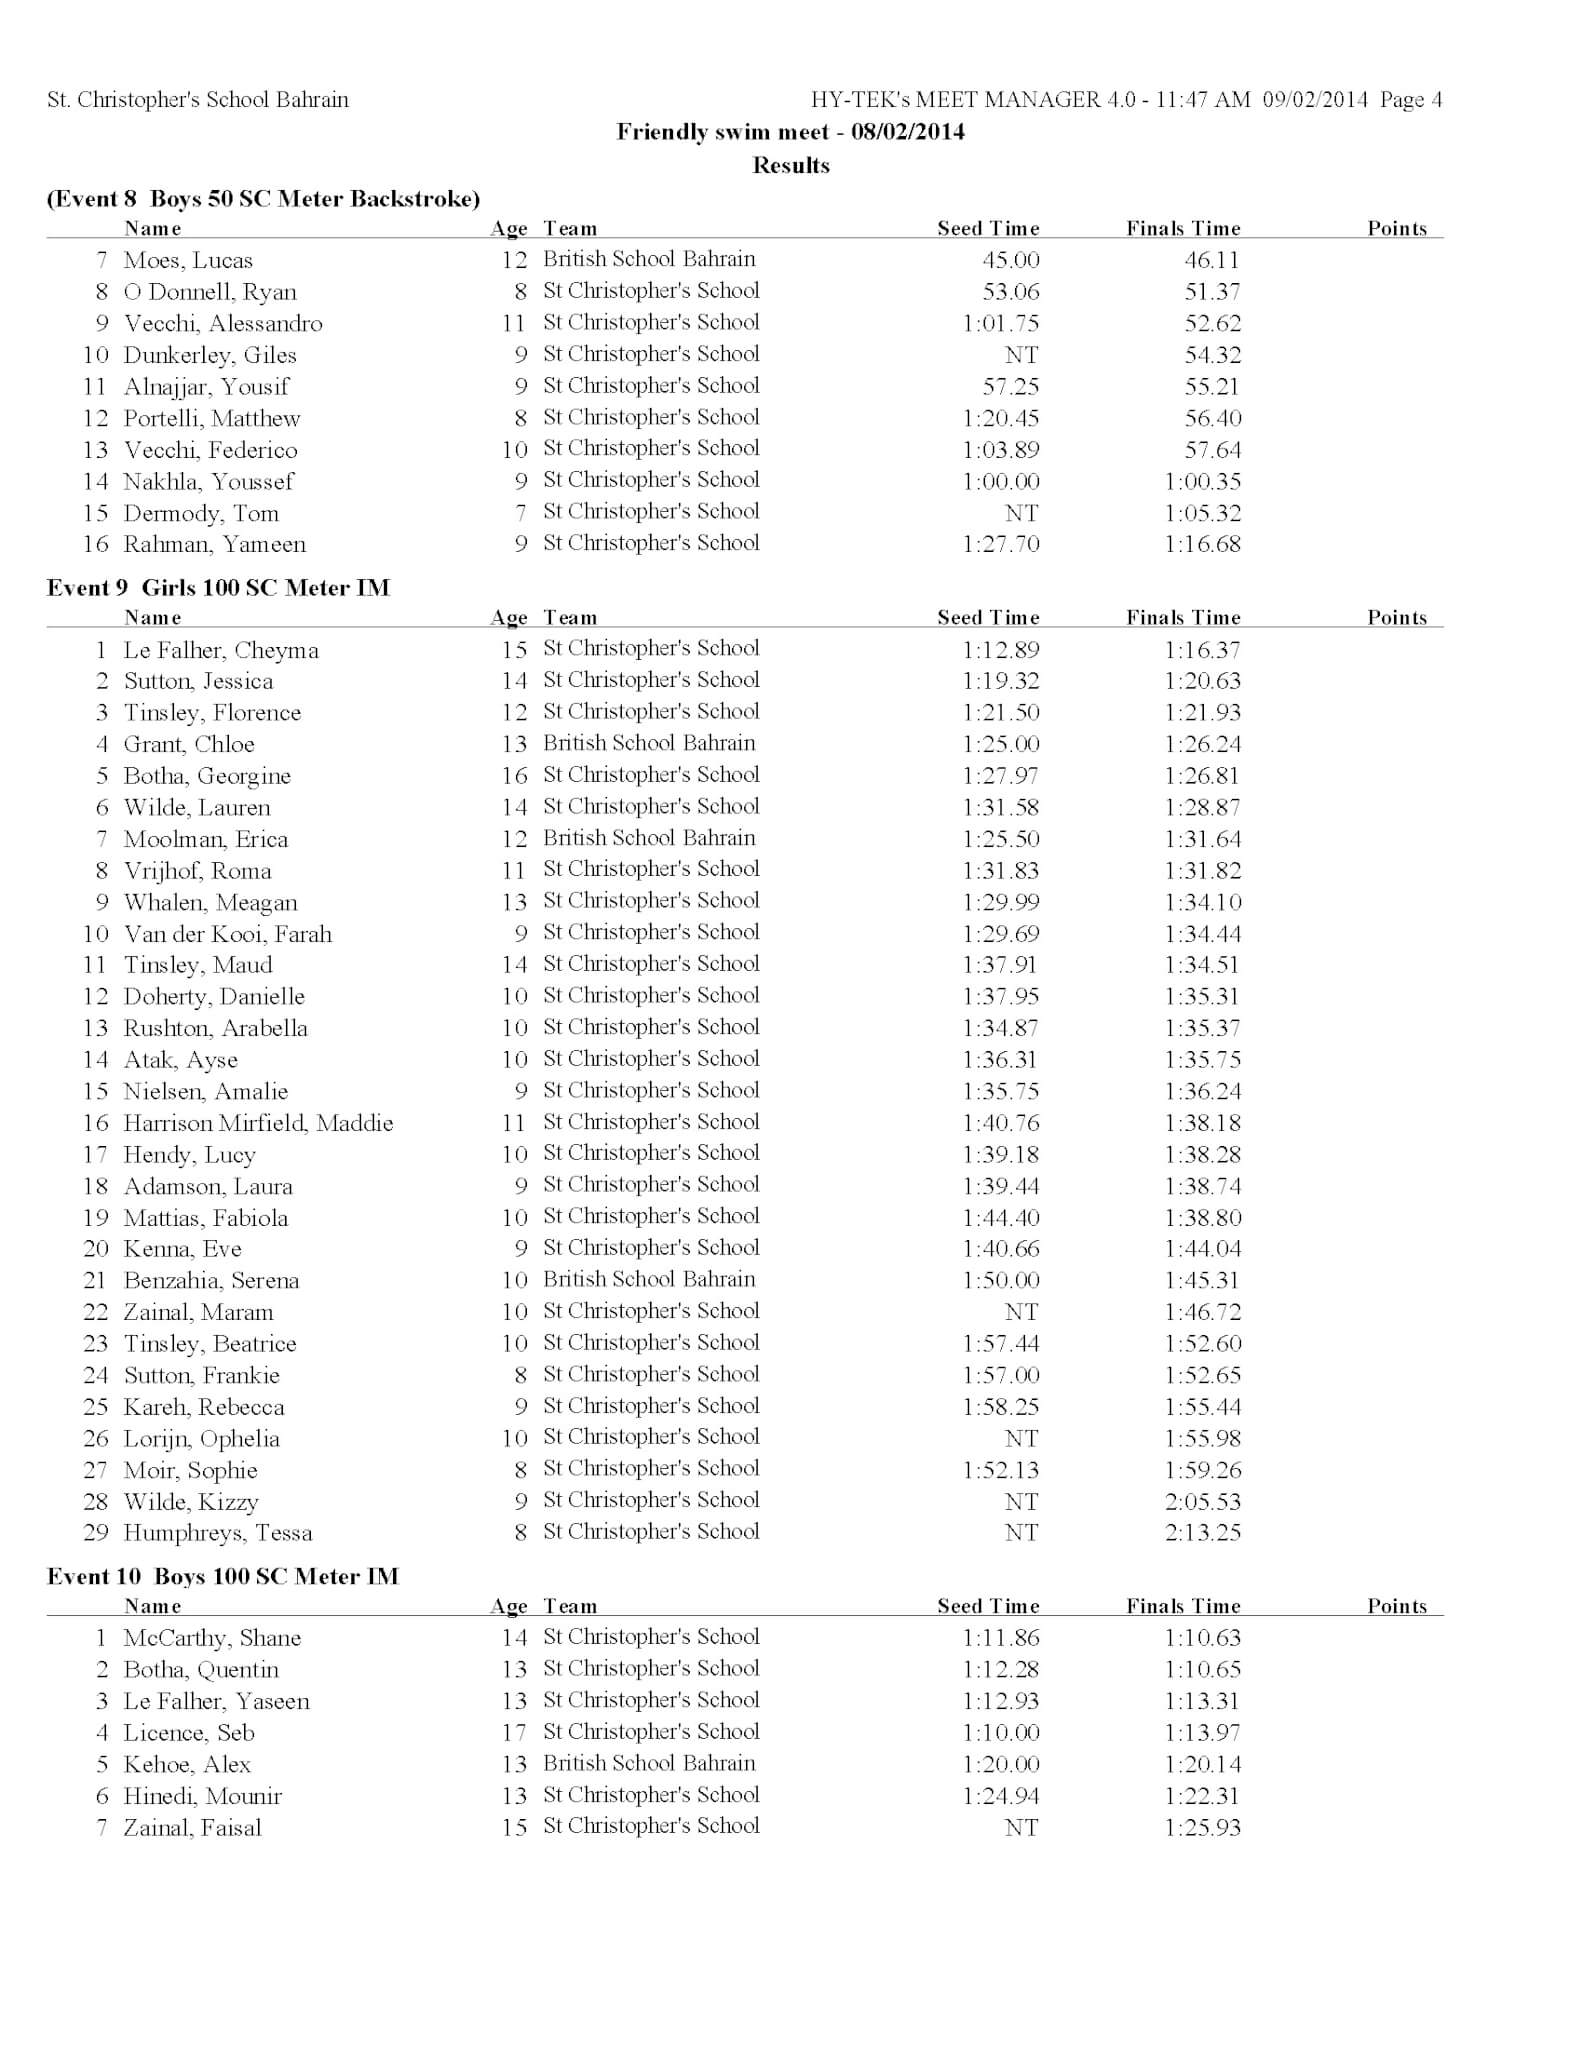 full results1_Page_4